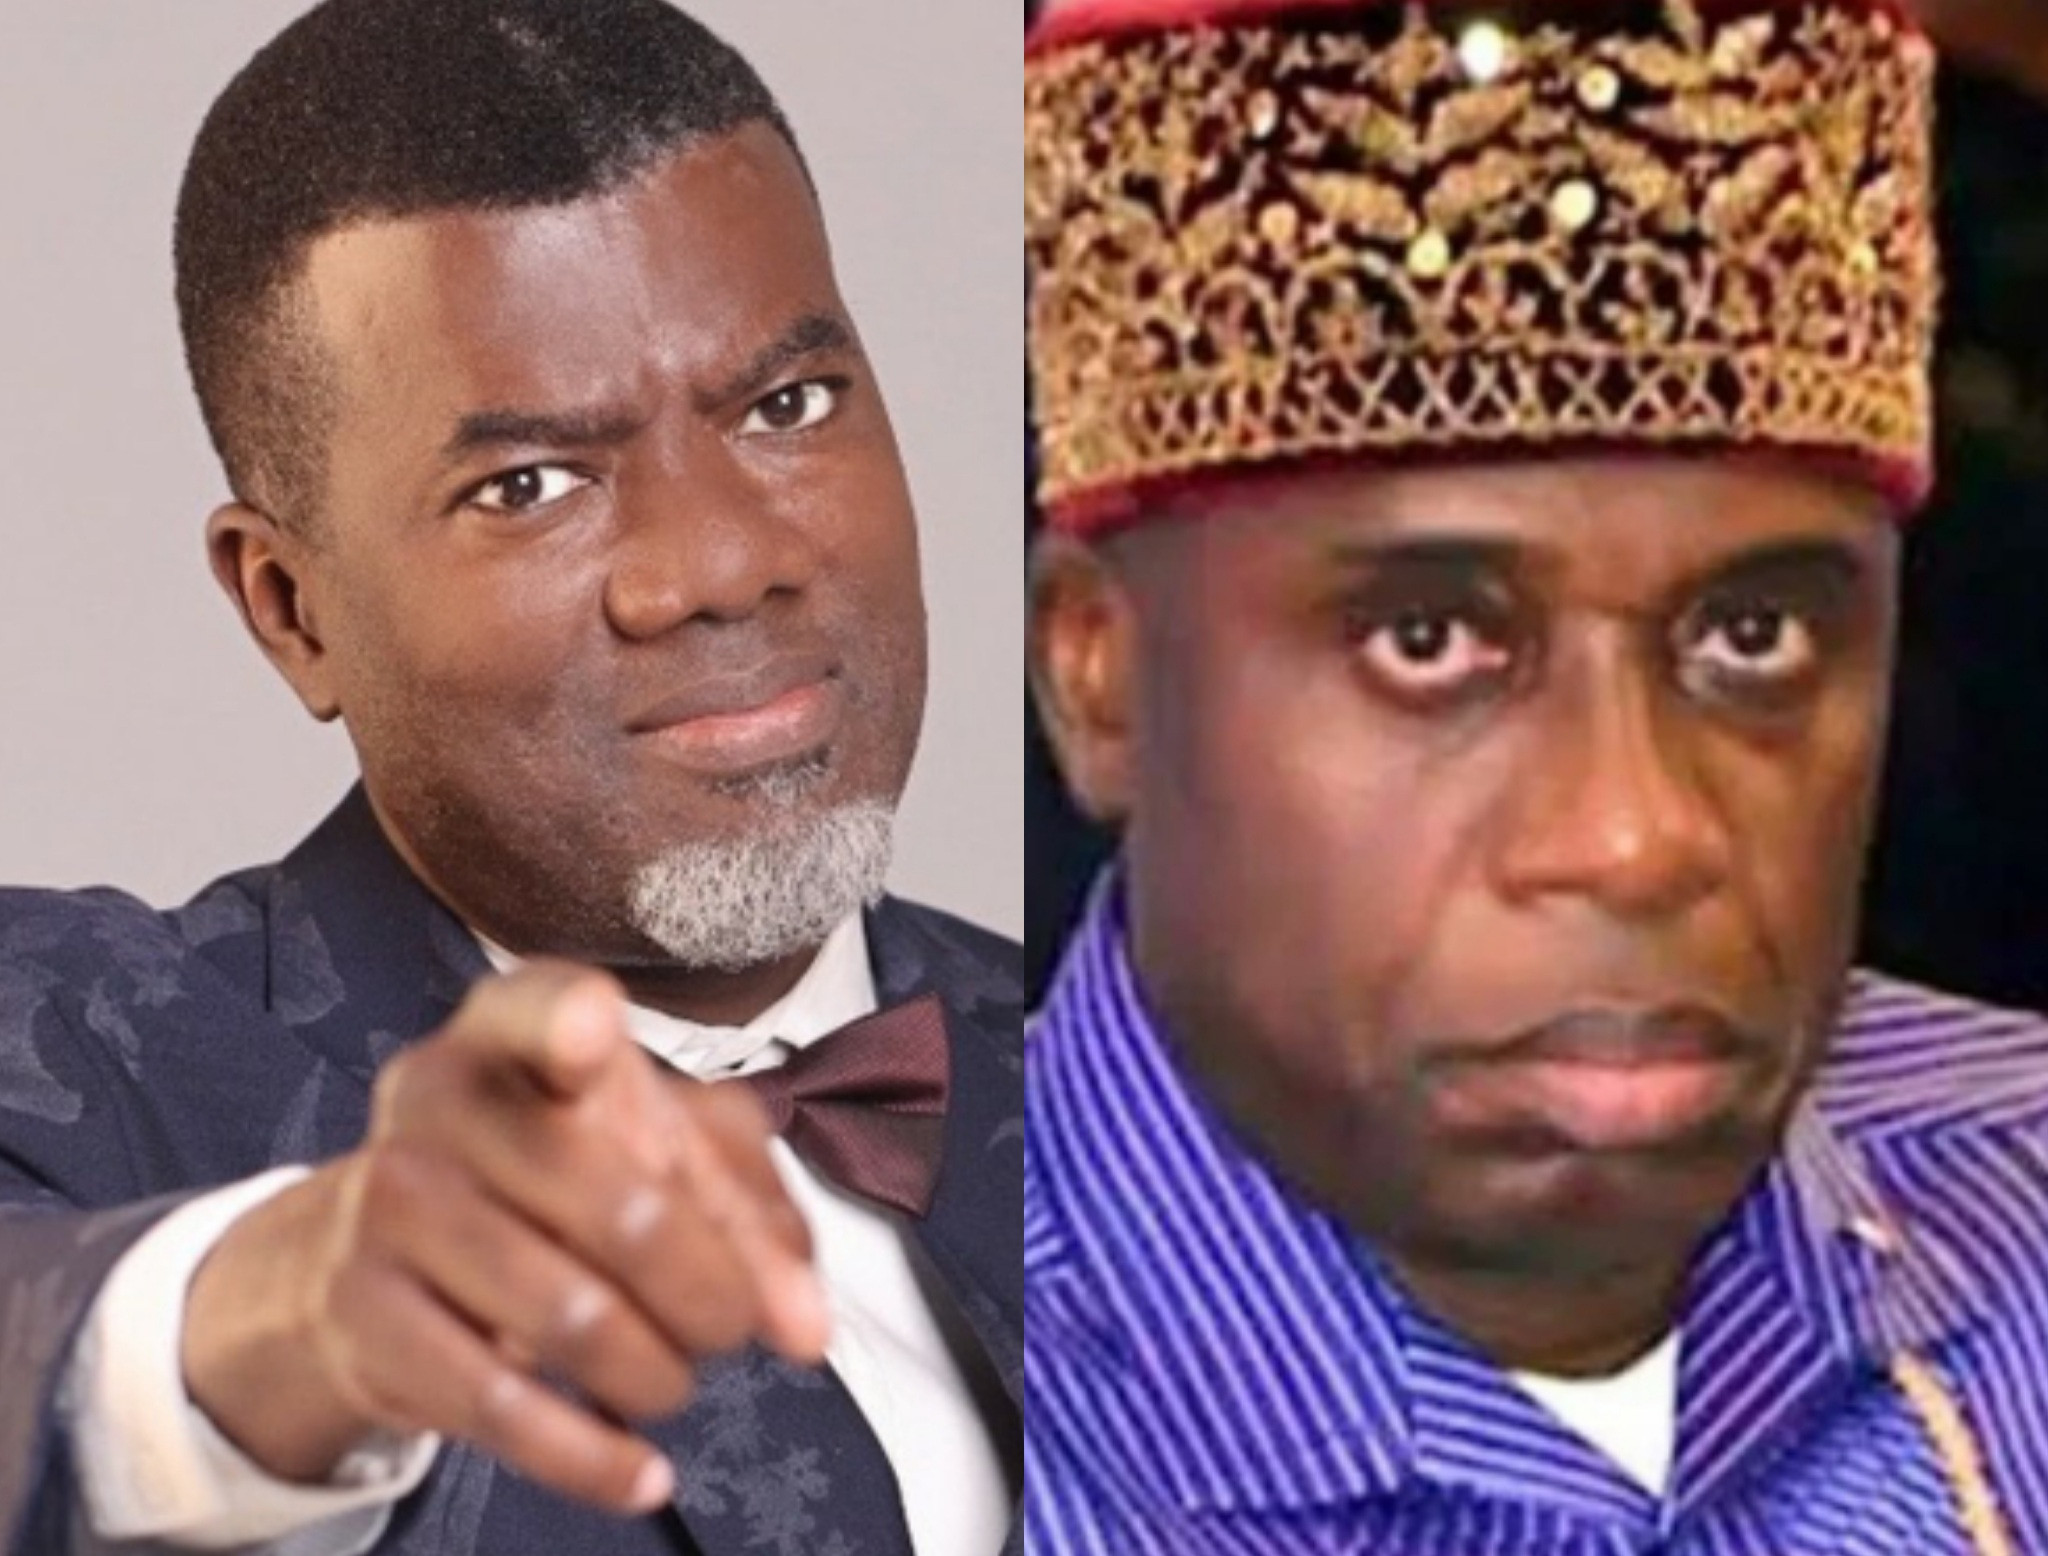 'From lion of Ubima to Lizard of Ubima' - Reno Omokri mocks Rotimi Amaechi after he lost out in the APC presidential primary election